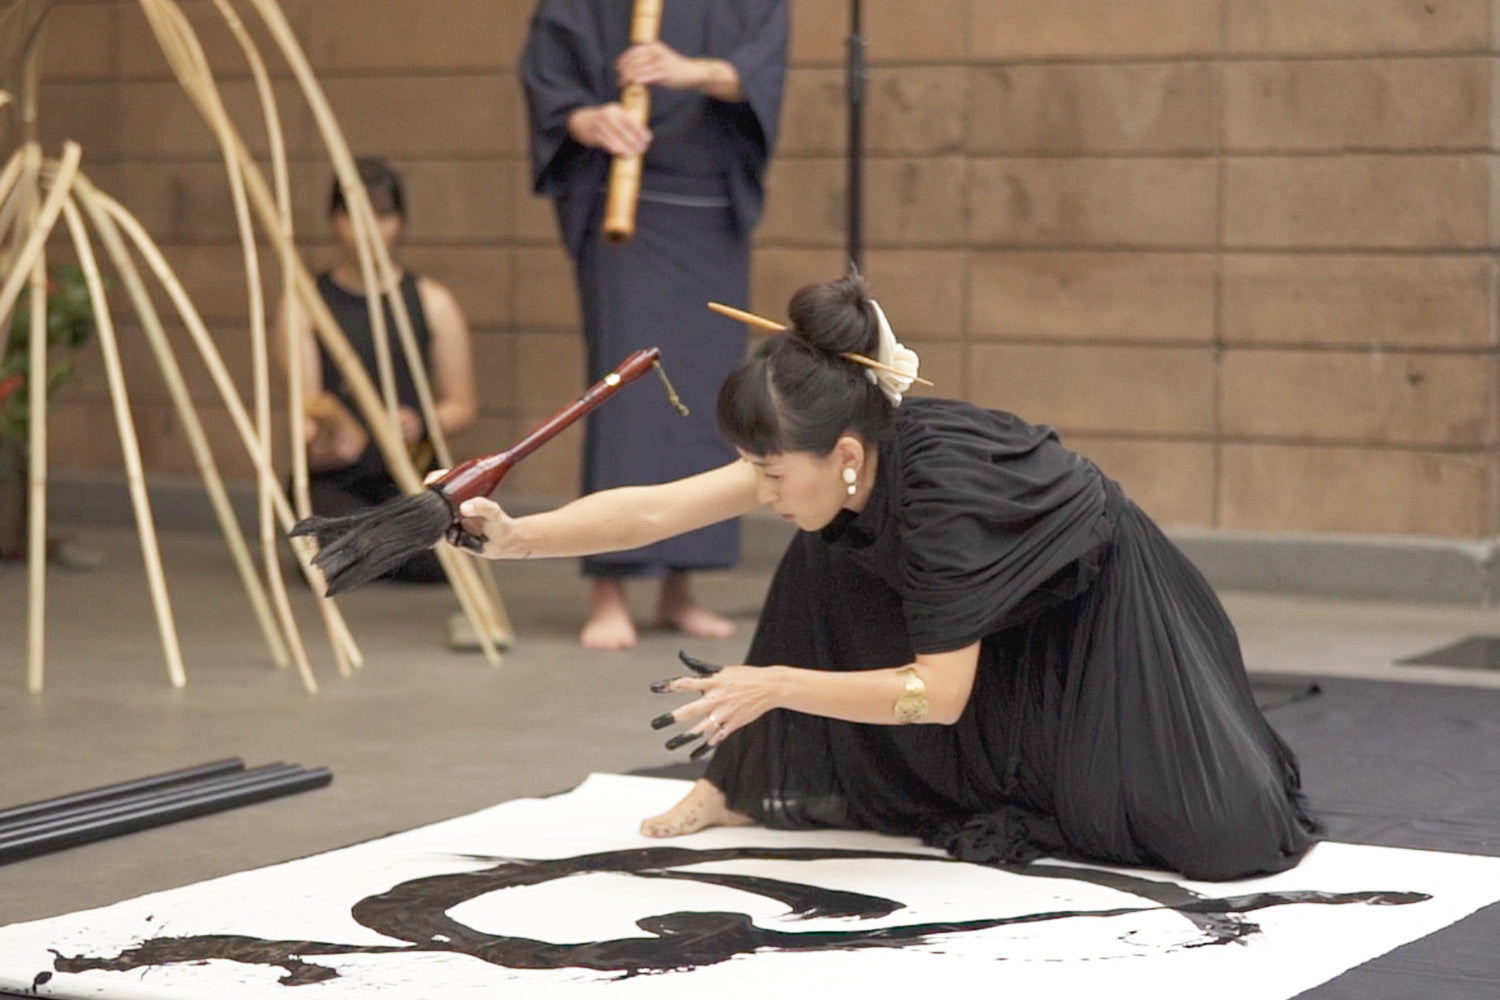 Aoi Yamaguchi opens for a San Francisco “ikebana” exhibit with a live calligraphy performance accompanied by a “shakuhachi.”